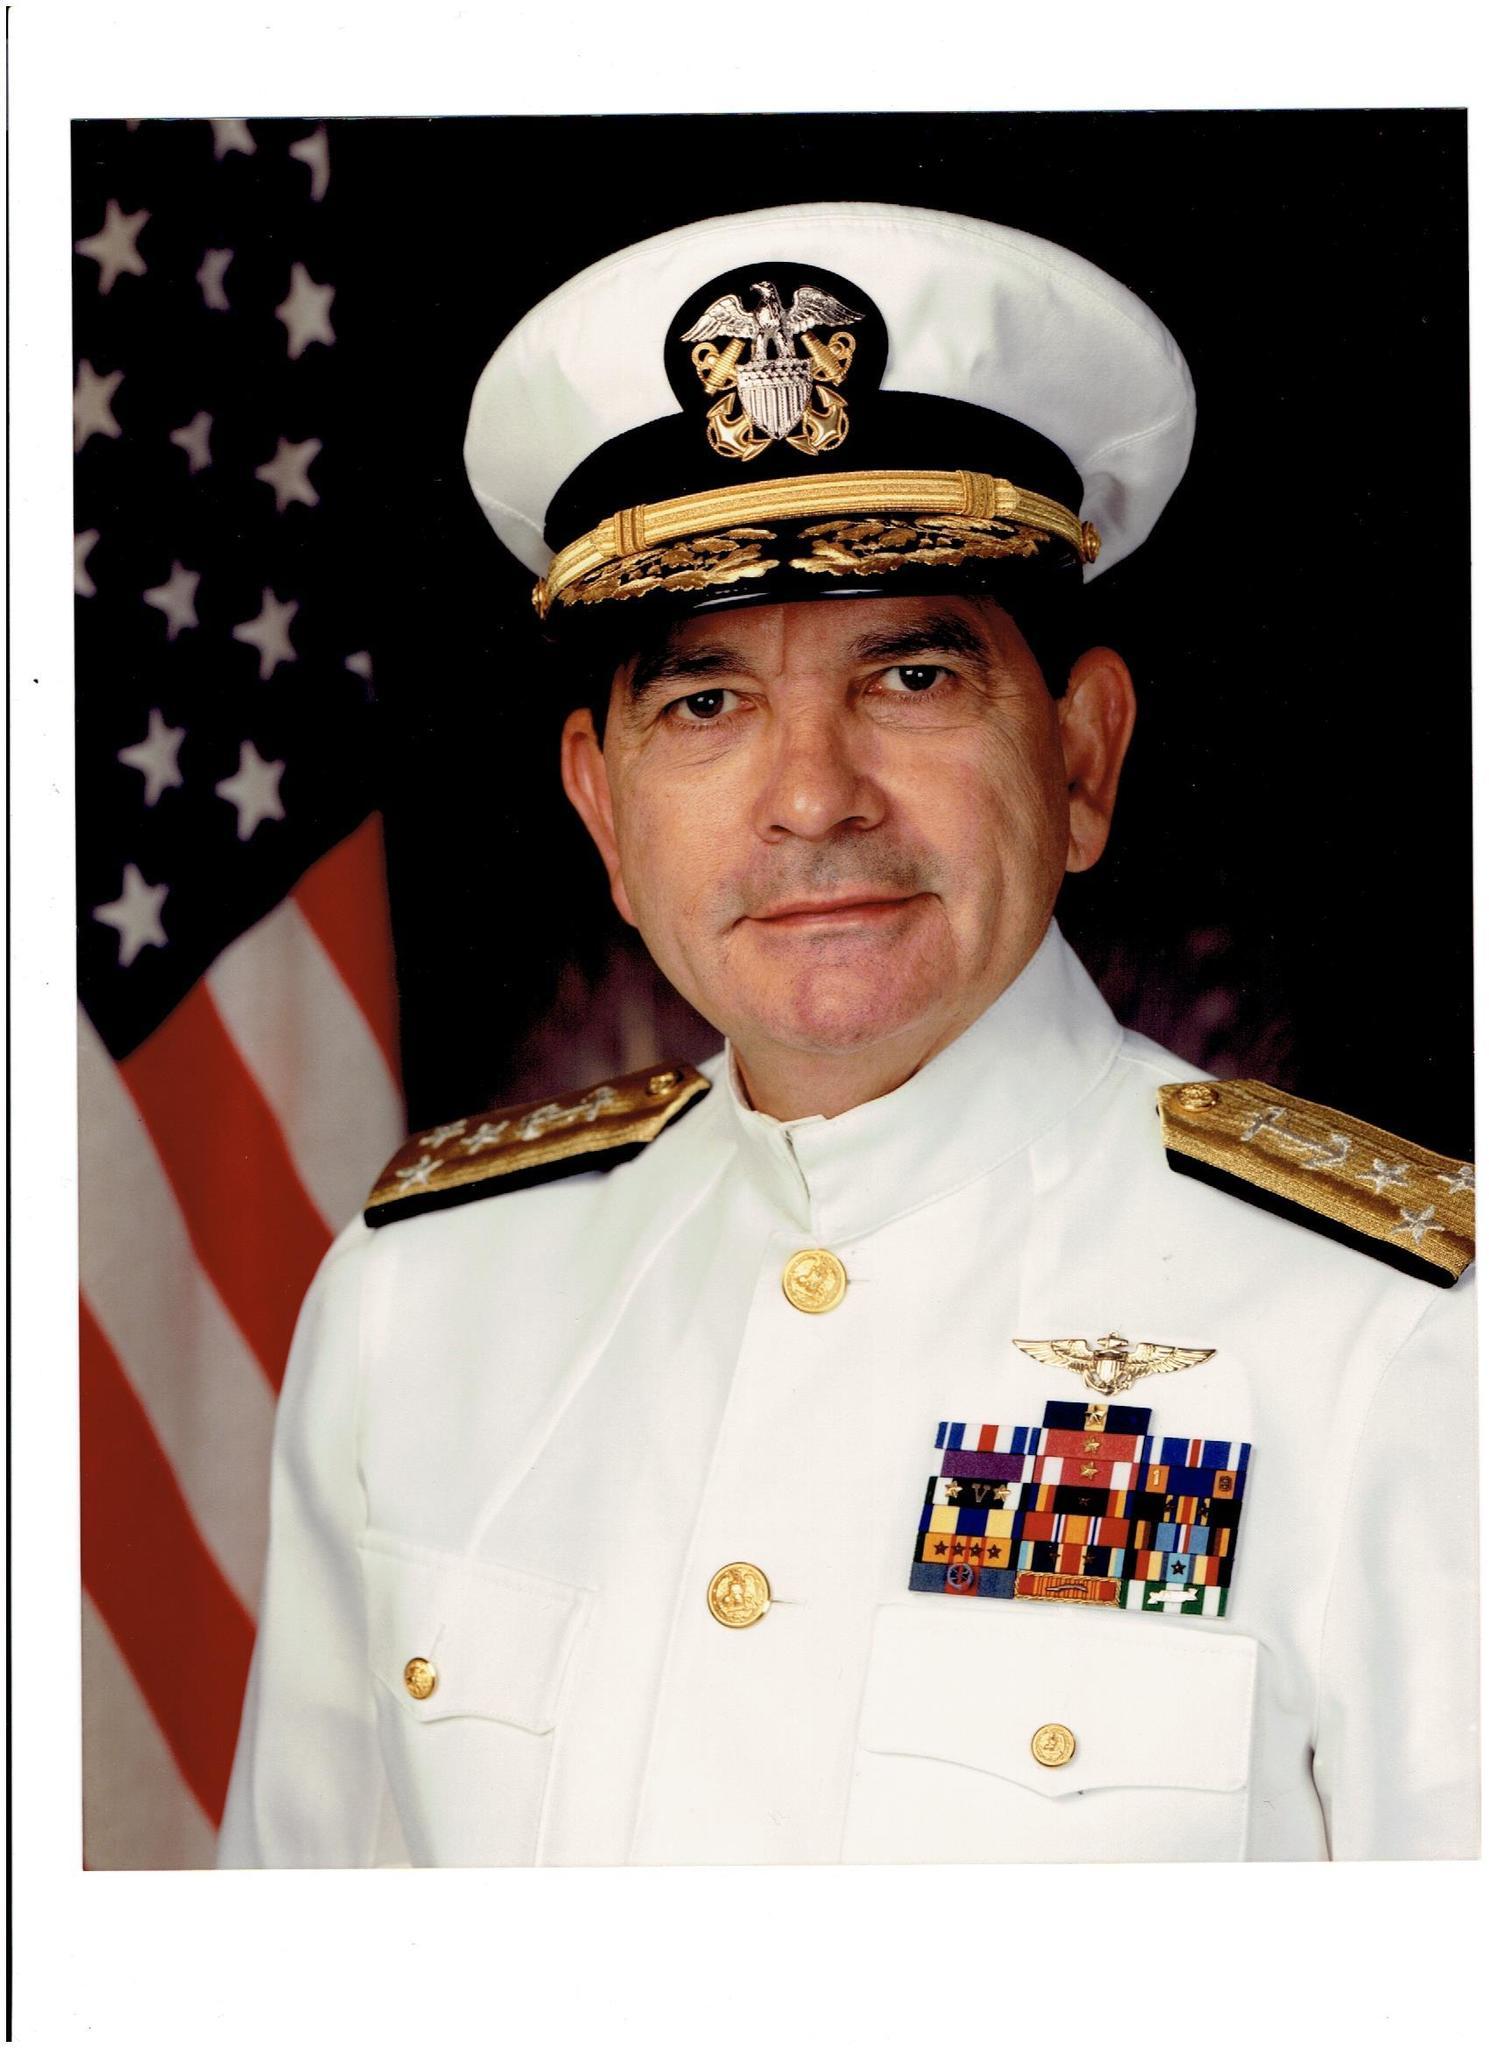 Adm. Diego Hernandez, a Vietnam hero tapped by the president for his